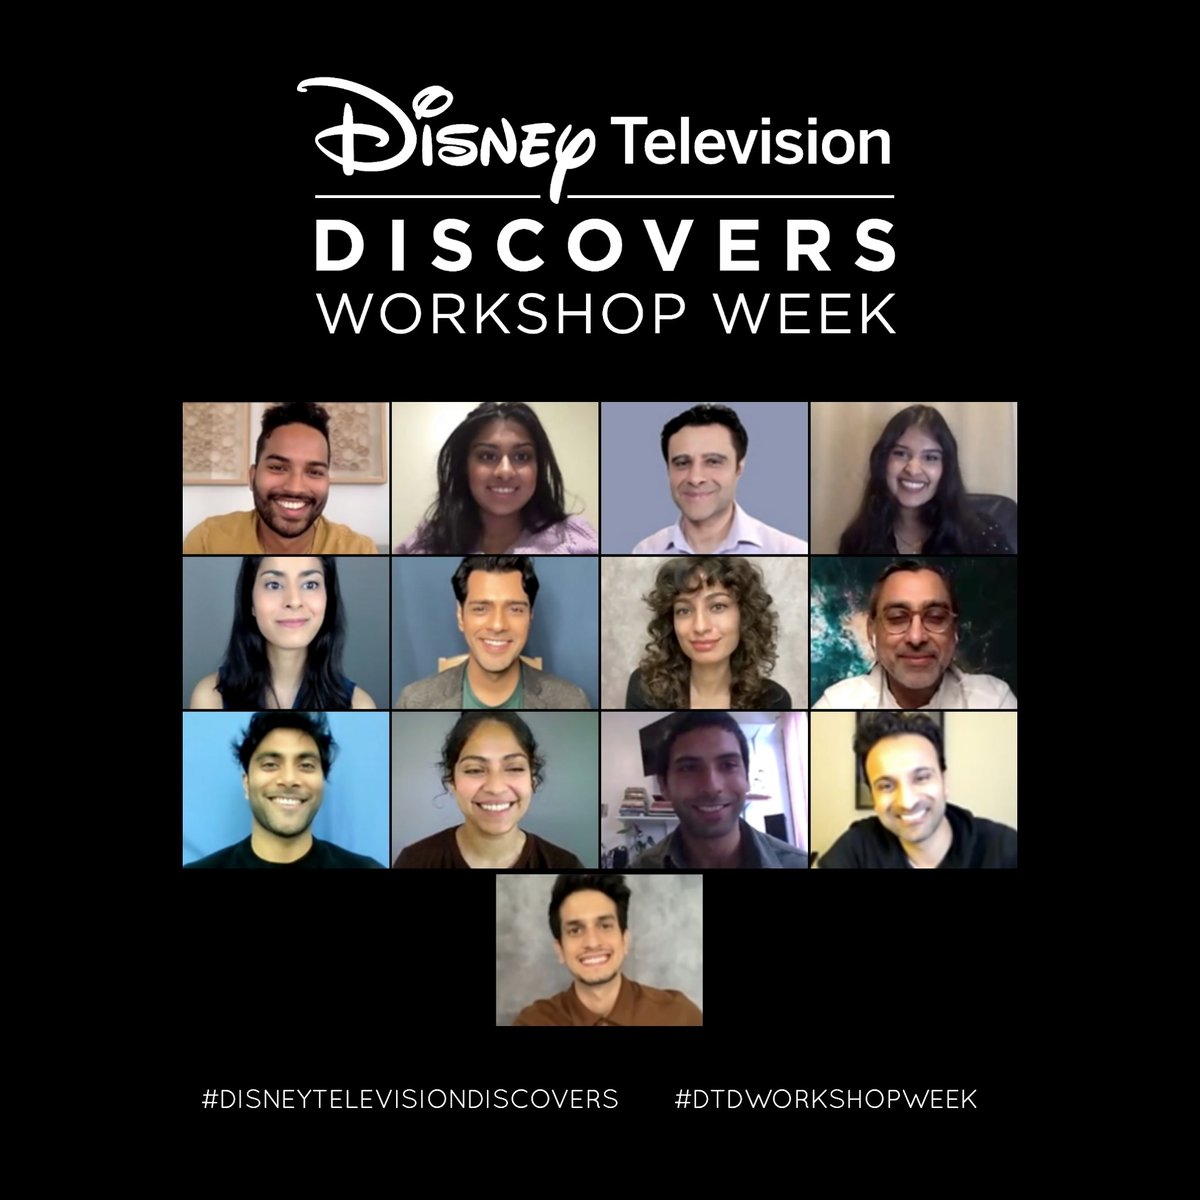 Our 2021 Disney Television Discovers: Workshop Week in New York continues with actors of SAMMA (South Asians in Media, Marketing and Entertainment Association). Thanks for joining remotely! #DisneyTelevisionDiscovers #DTDWorkshopWeek